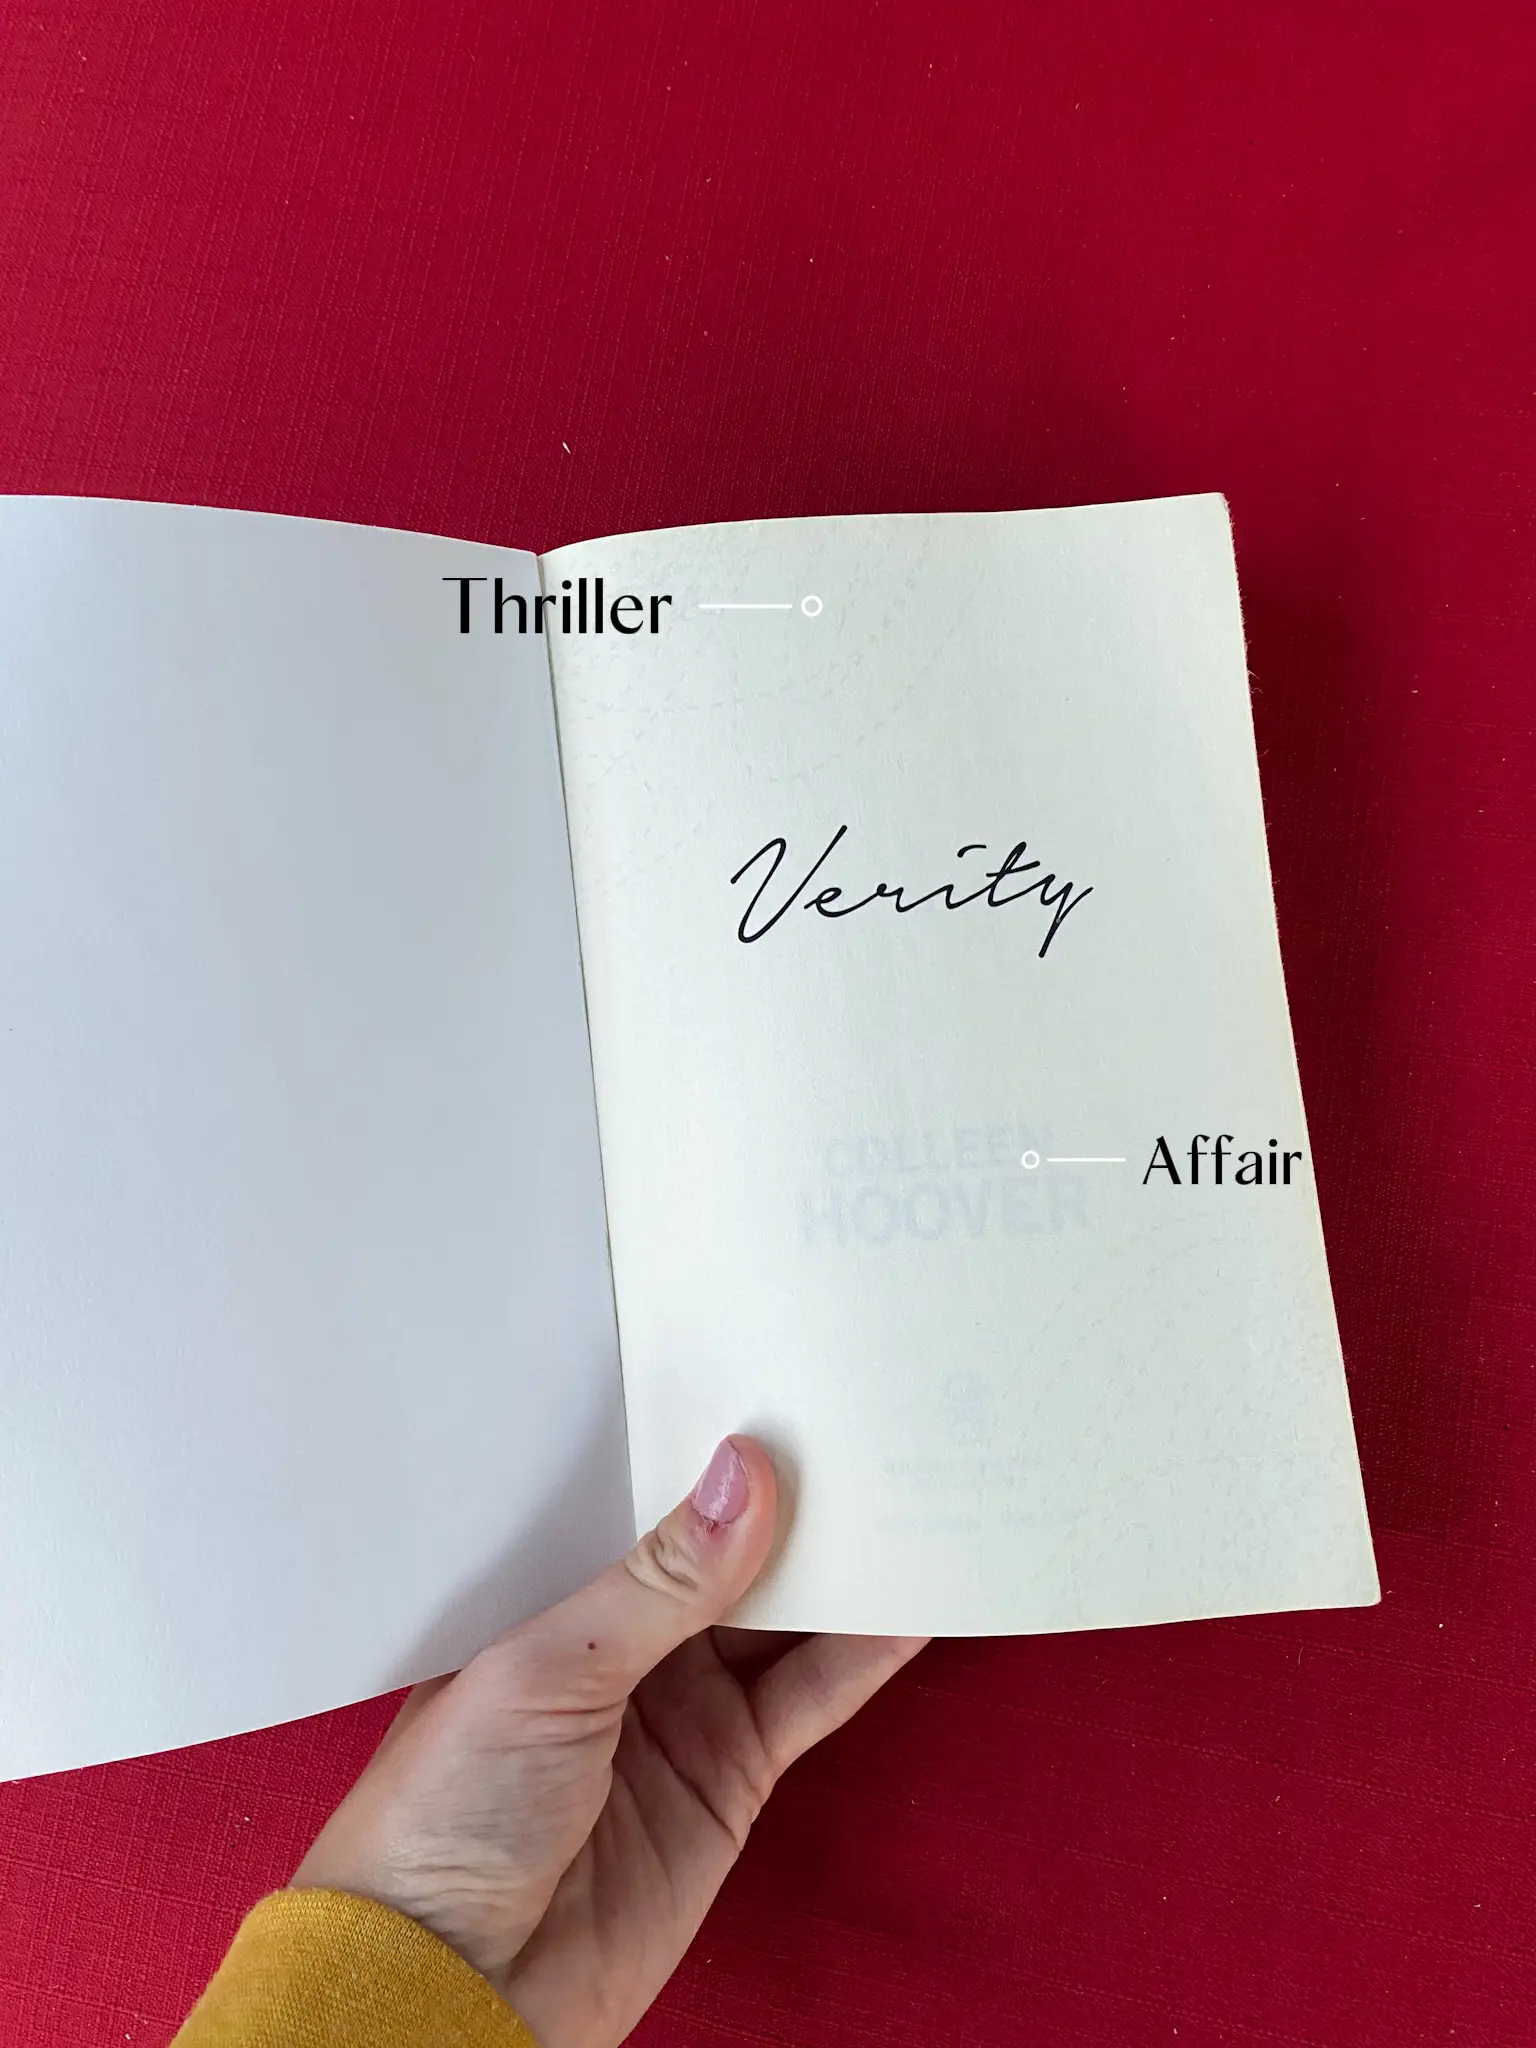 A Detailed Review Of “Verity” by Colleen Hoover: The Suspense Thriller That  Has Questioned My Ideas Of Obsessive Love, by The Flower Of Life